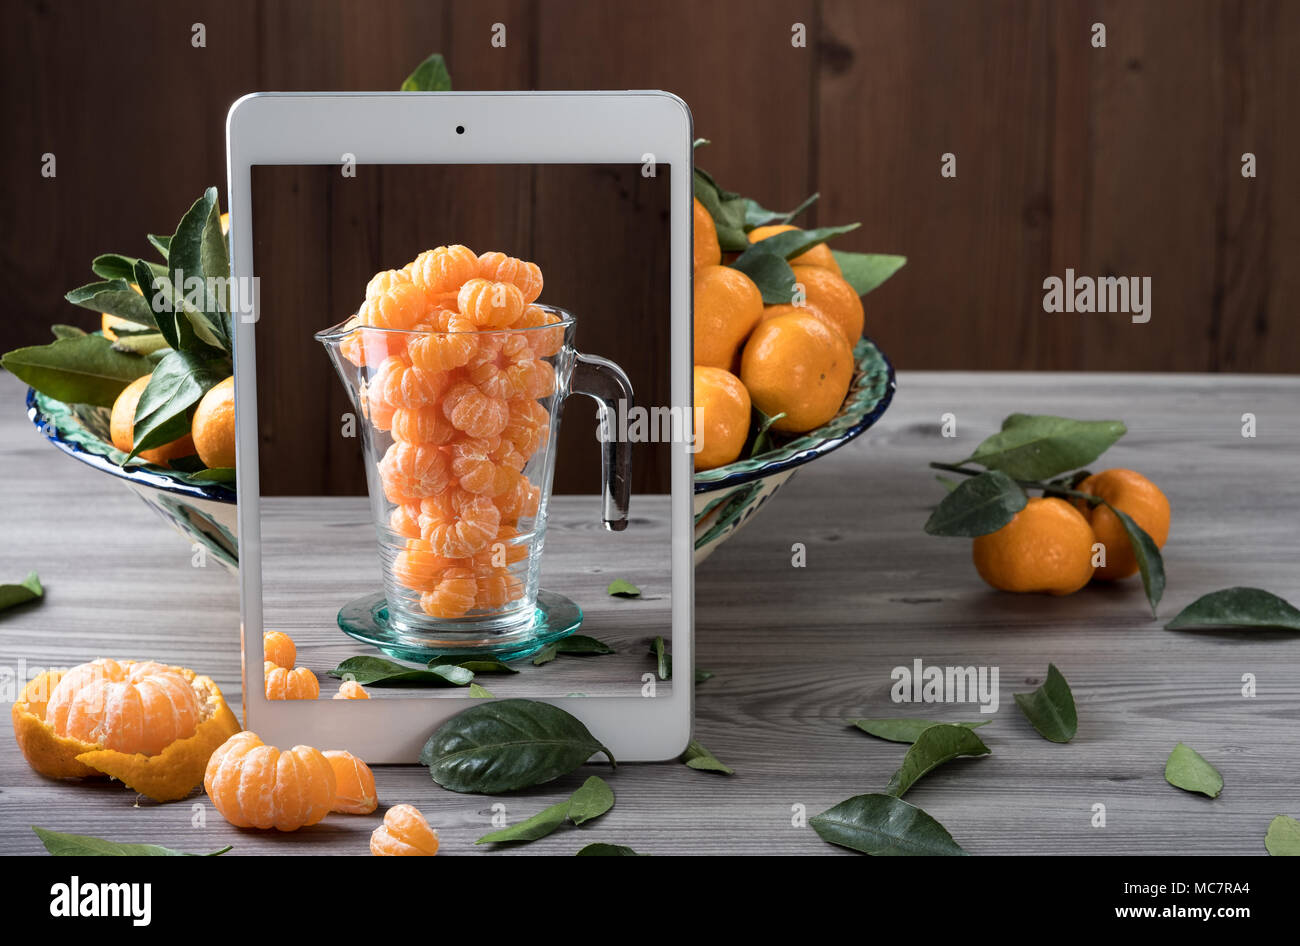 White mobile tablet standing in front of ceramic dish filled fresh tangerines on gray wooden table. Pop up visual effect. Creative food composition. Stock Photo